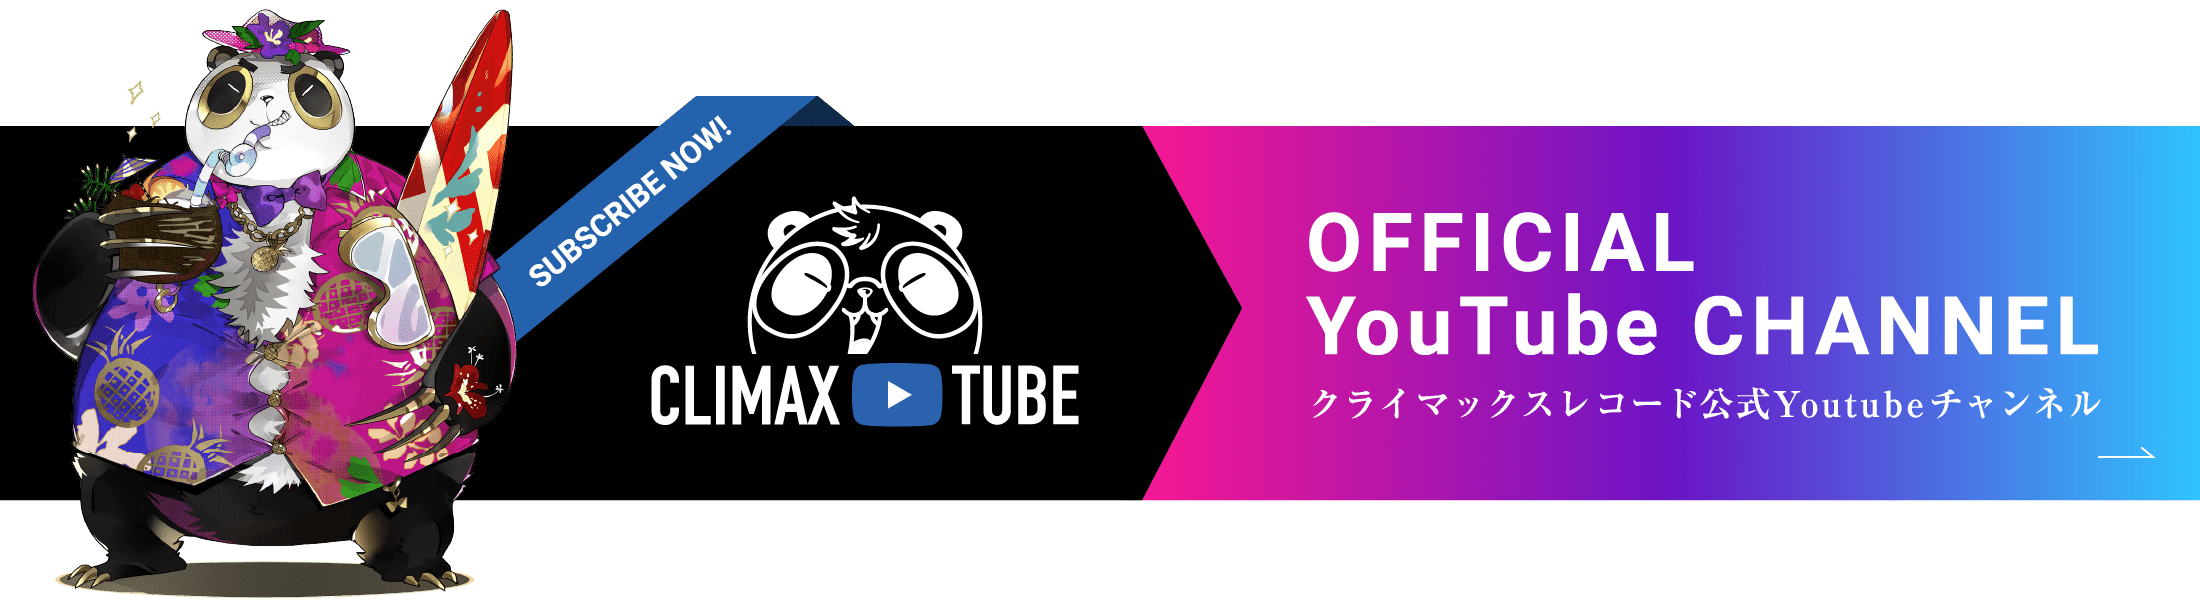 OFFICIAL YouTube CHANNEL クライマックスレコード公式Youtubeチャンネル